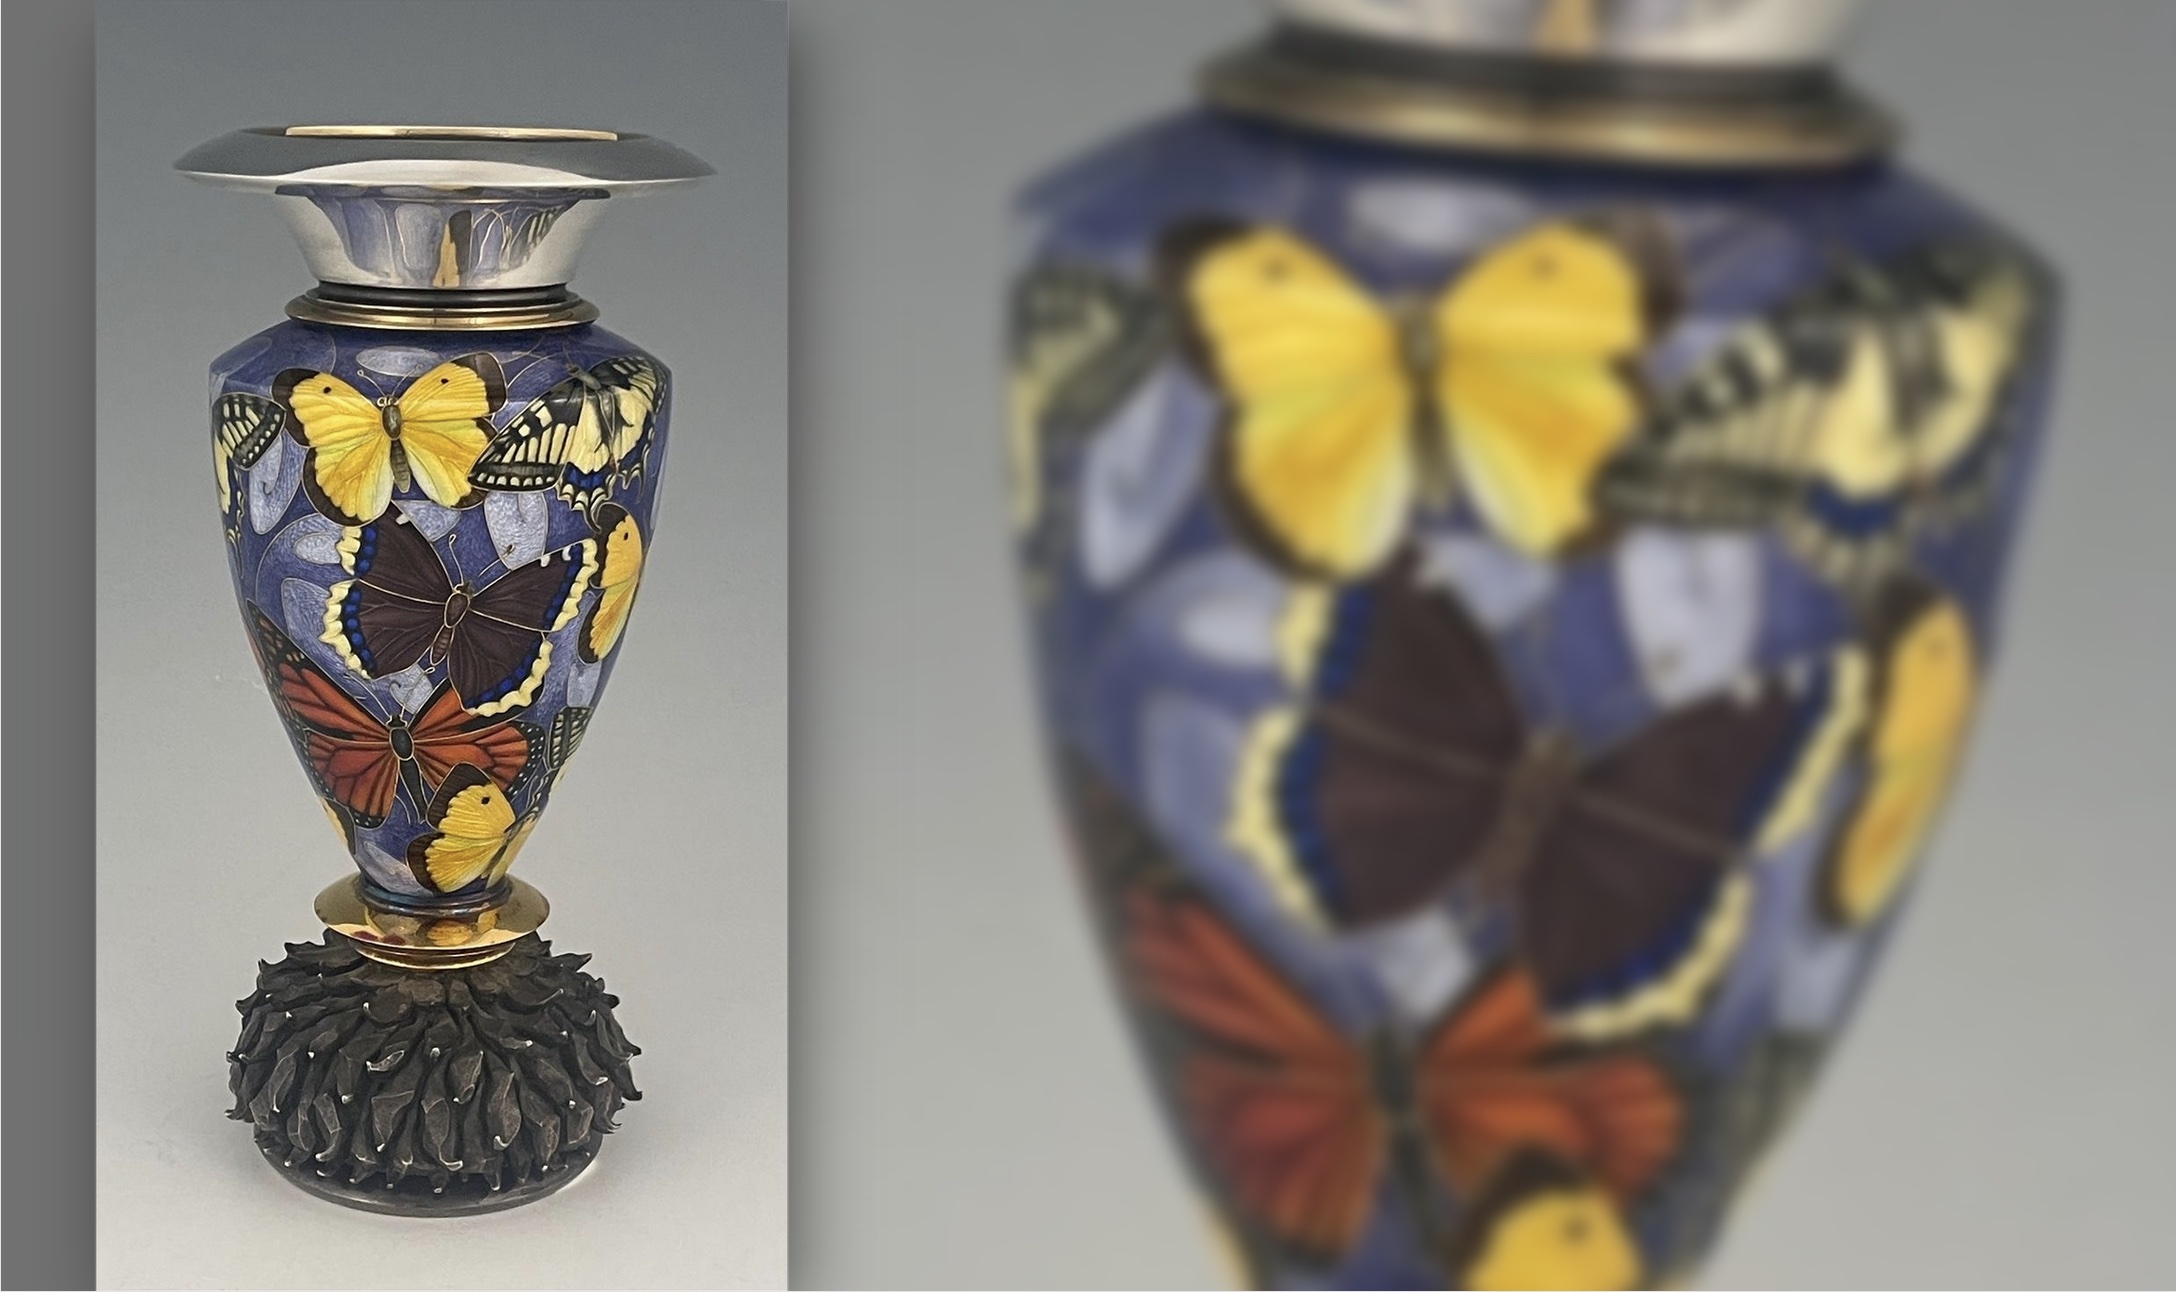 Fred Rich silver and enamel vase in sale – Antique Collecting